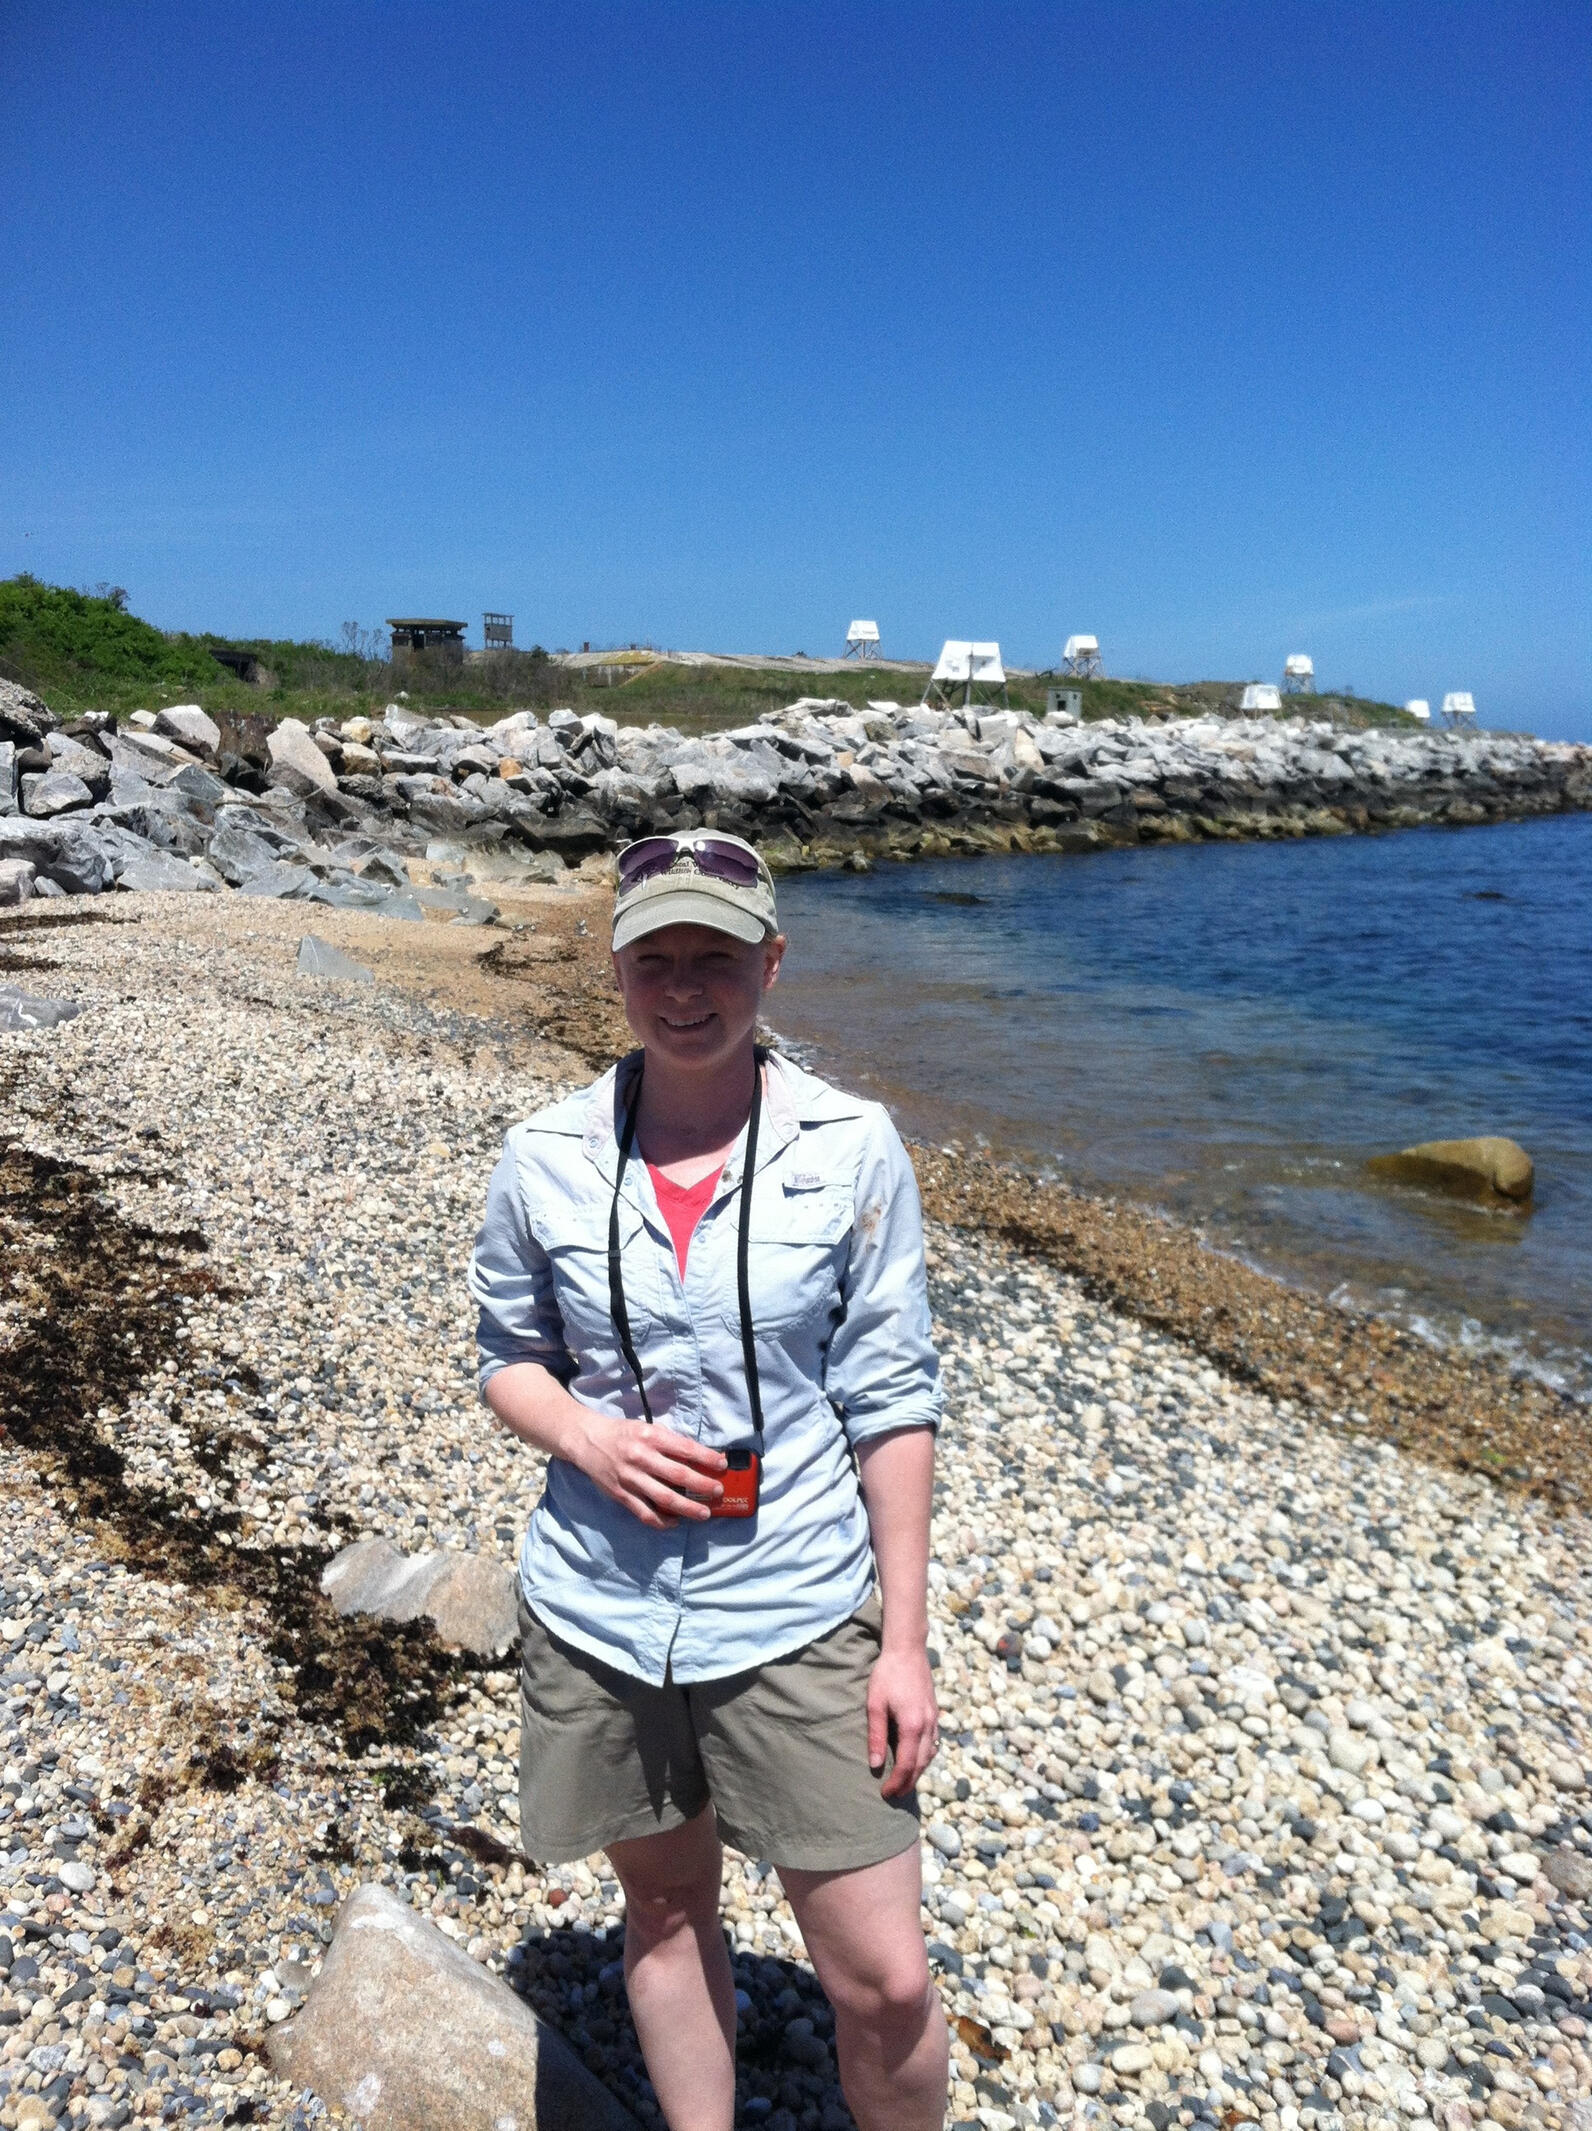 Victoria stands on a small waterfront beach area with many rocks and shells, wearing a blue button down holding binoculars